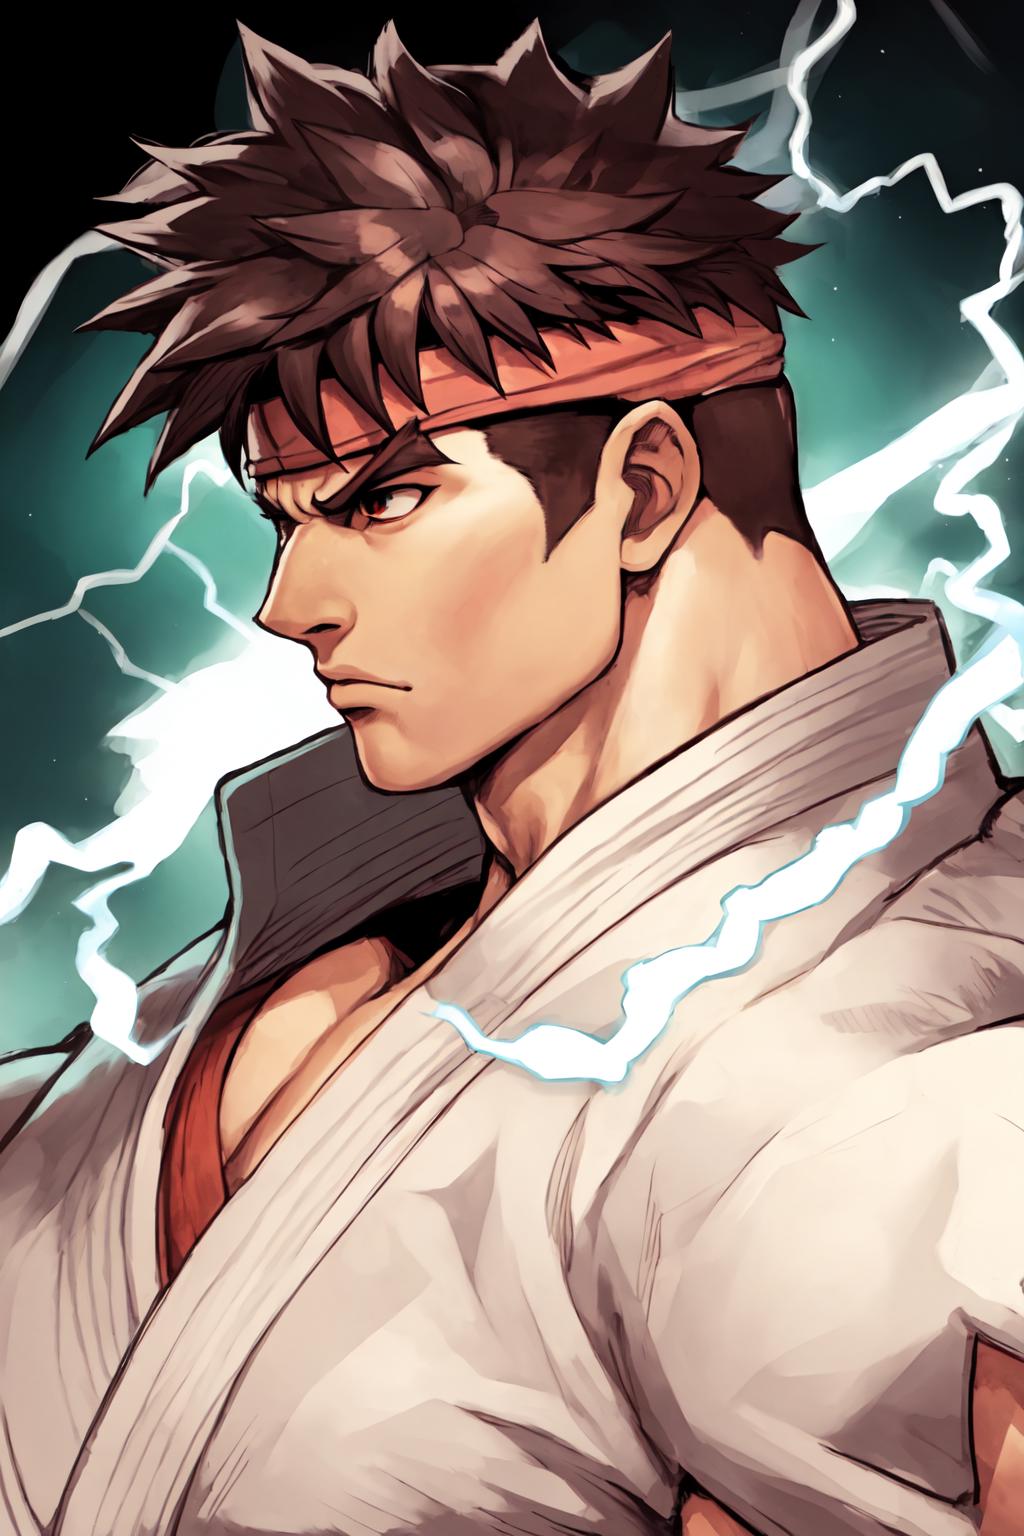 ryu from street fighter6